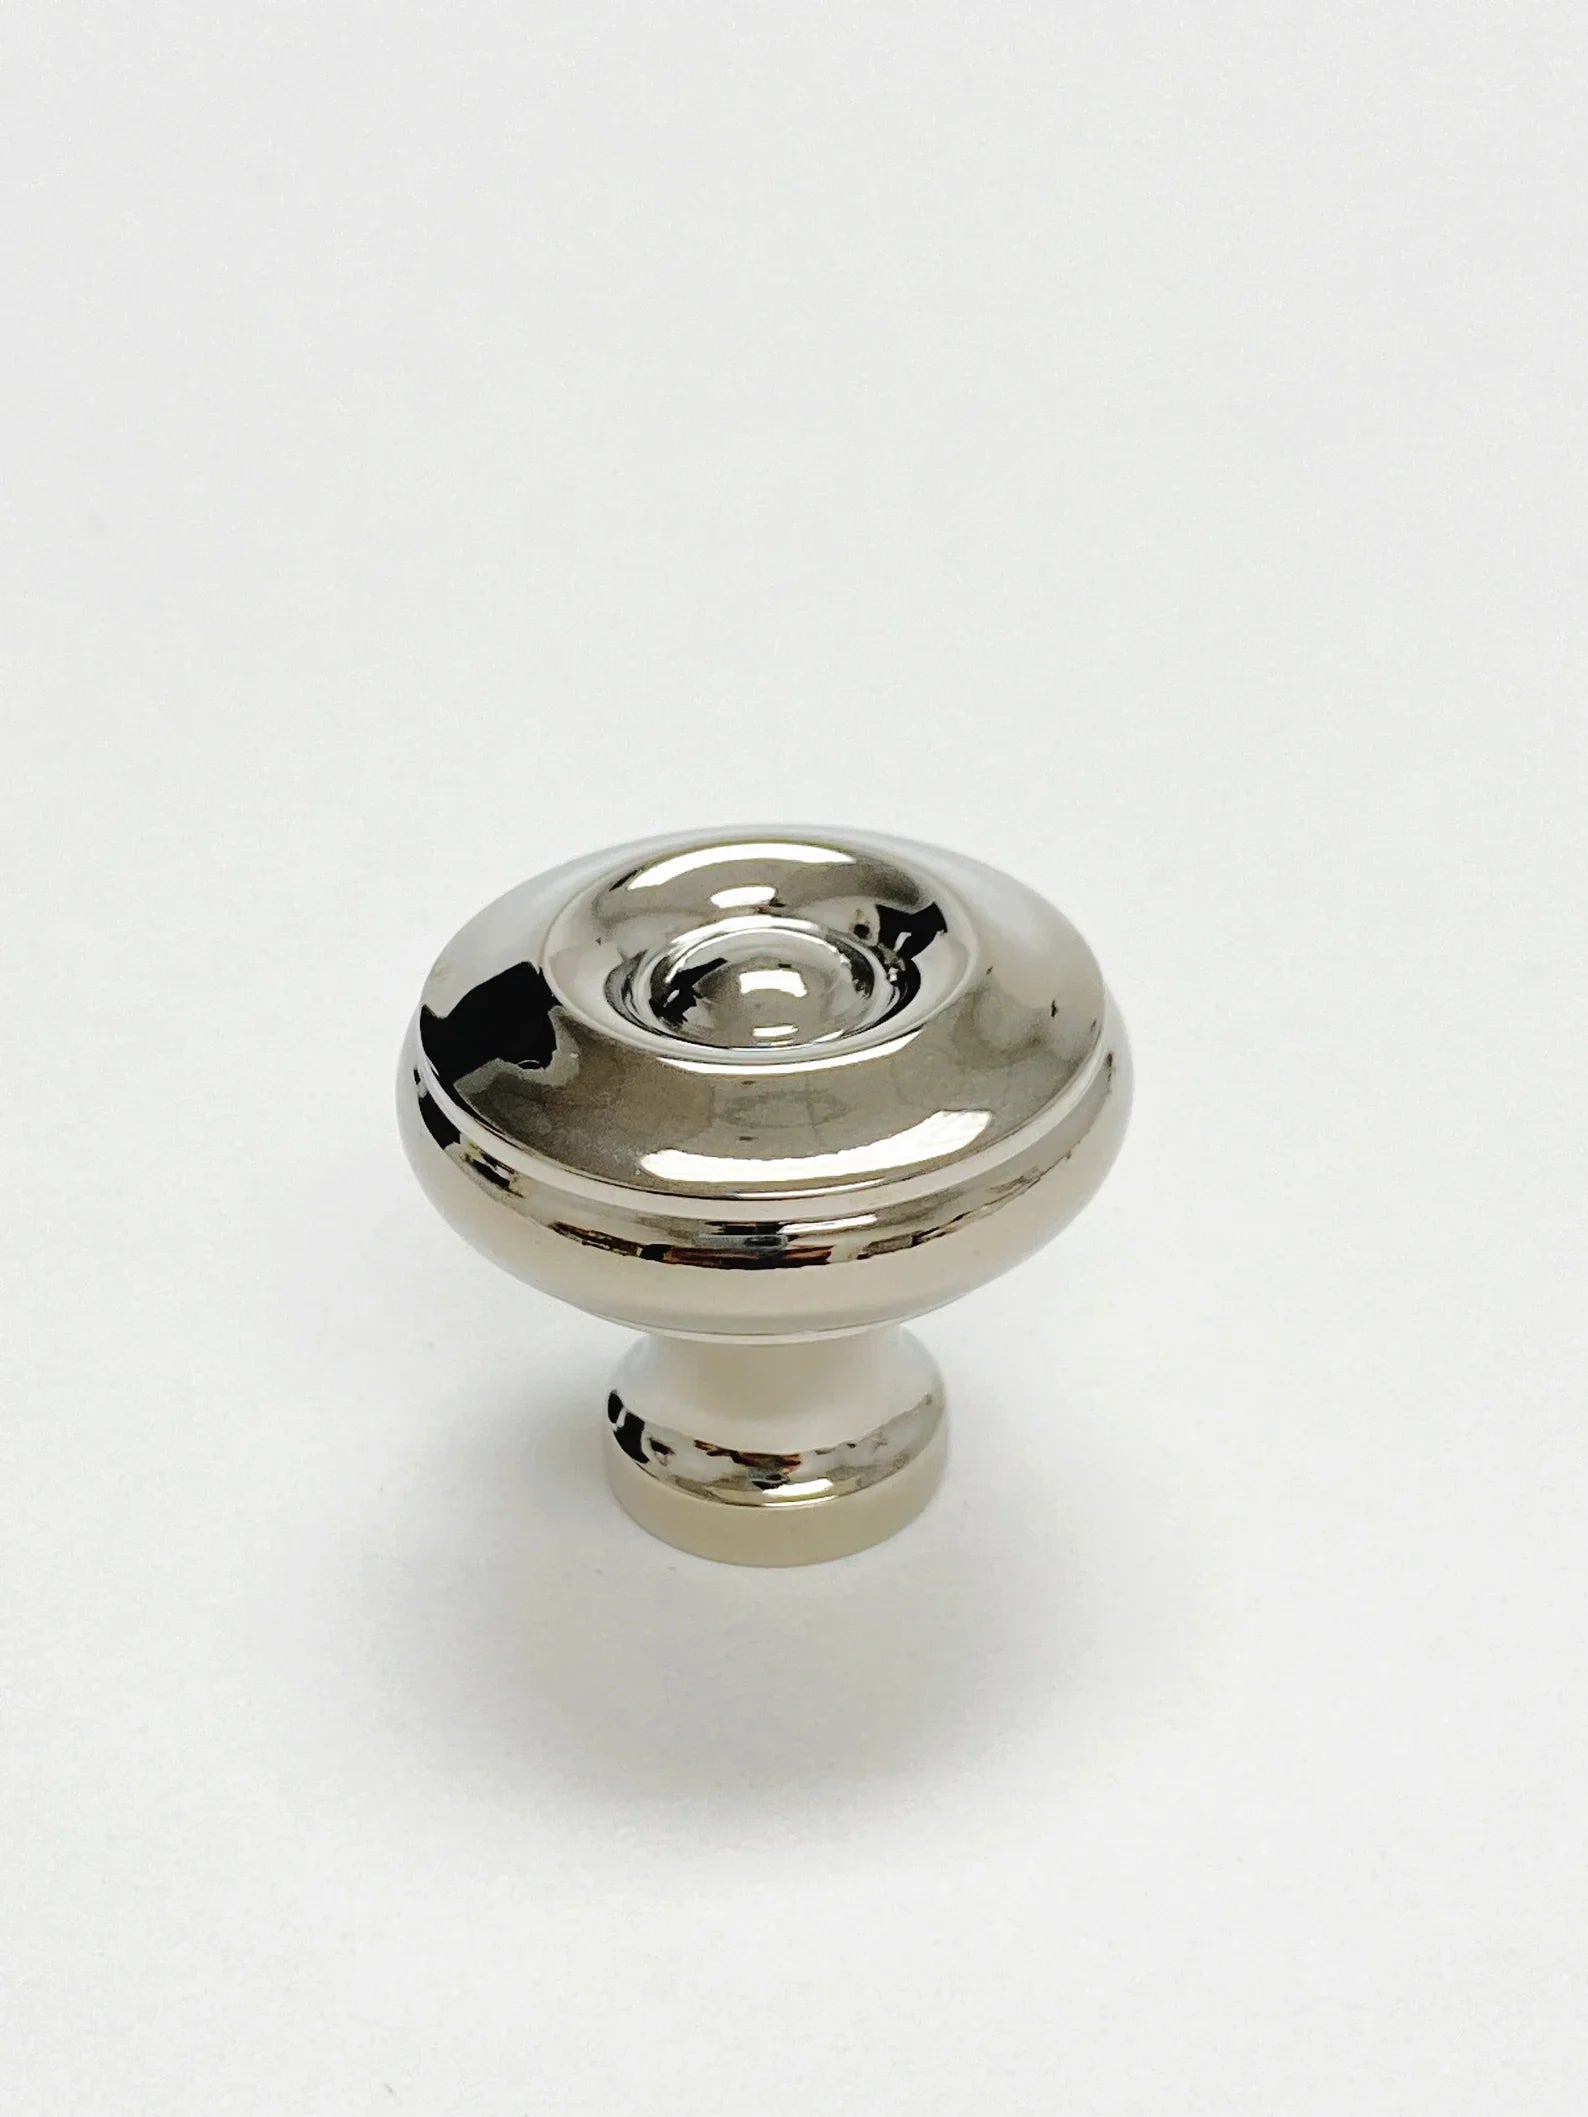 Polished Nickel "Heritage No.2" Cabinet Knobs and Wire Pulls